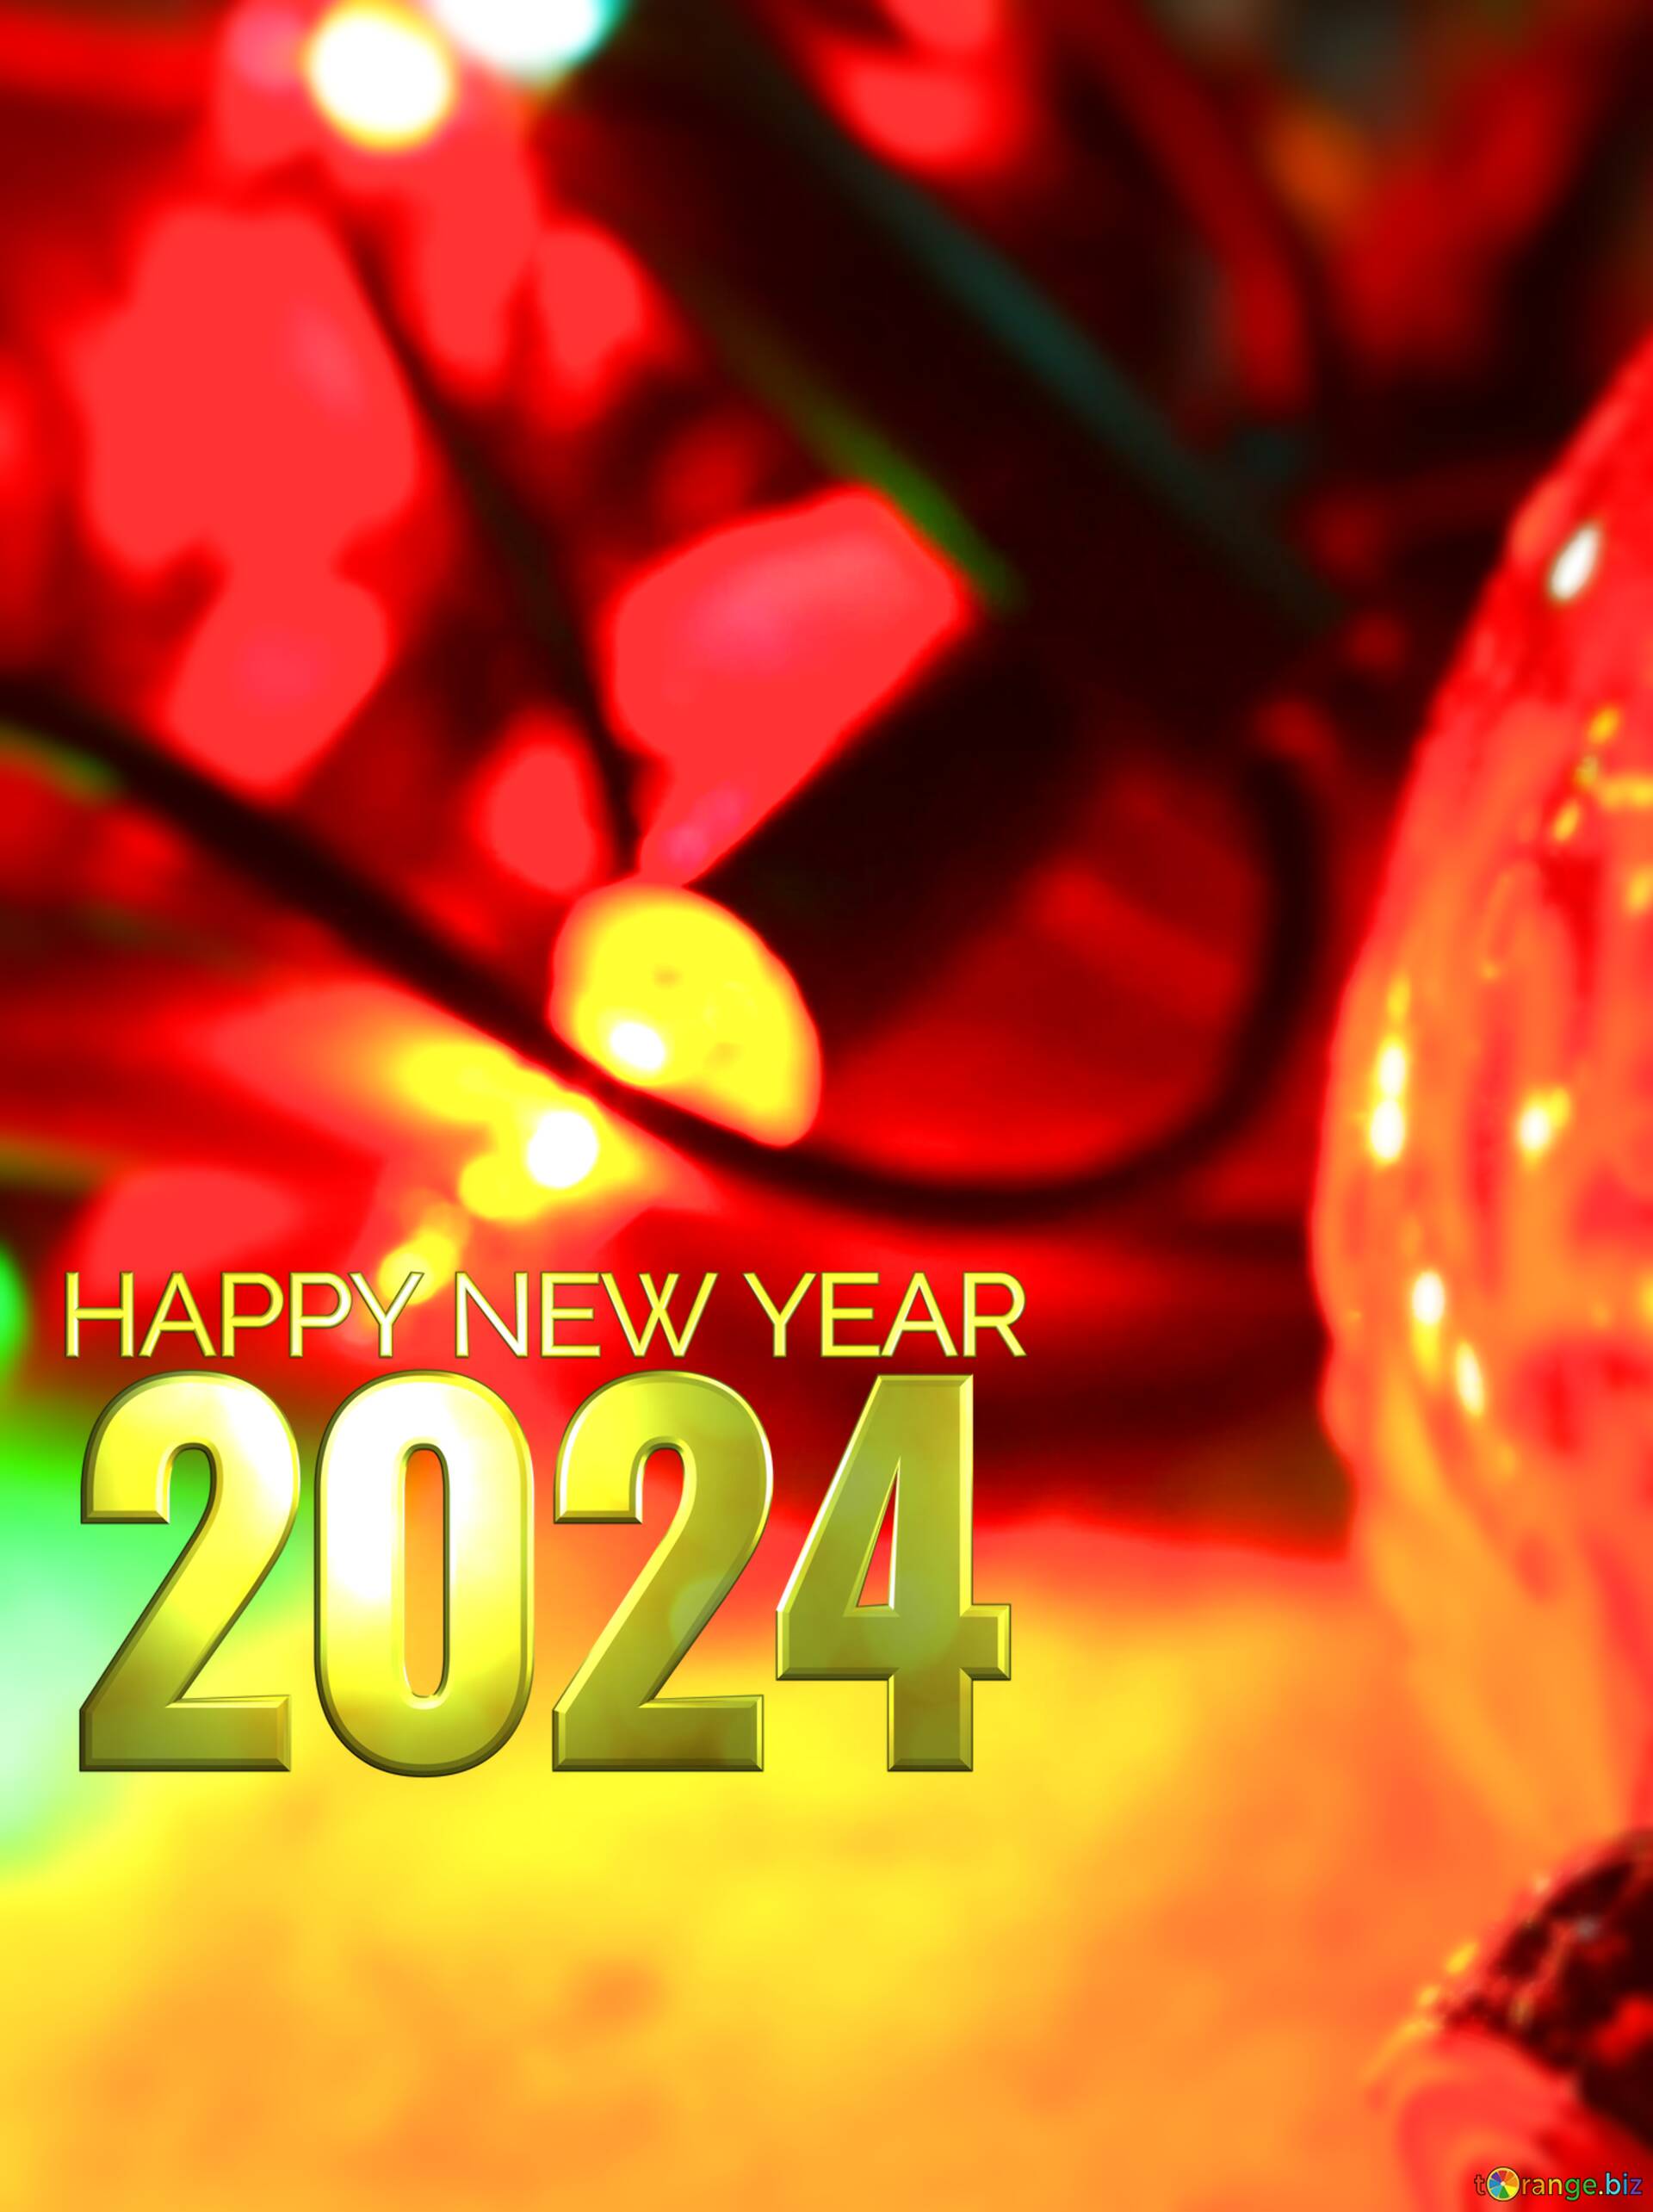 a happy new year card 2024 Download free picture №36508